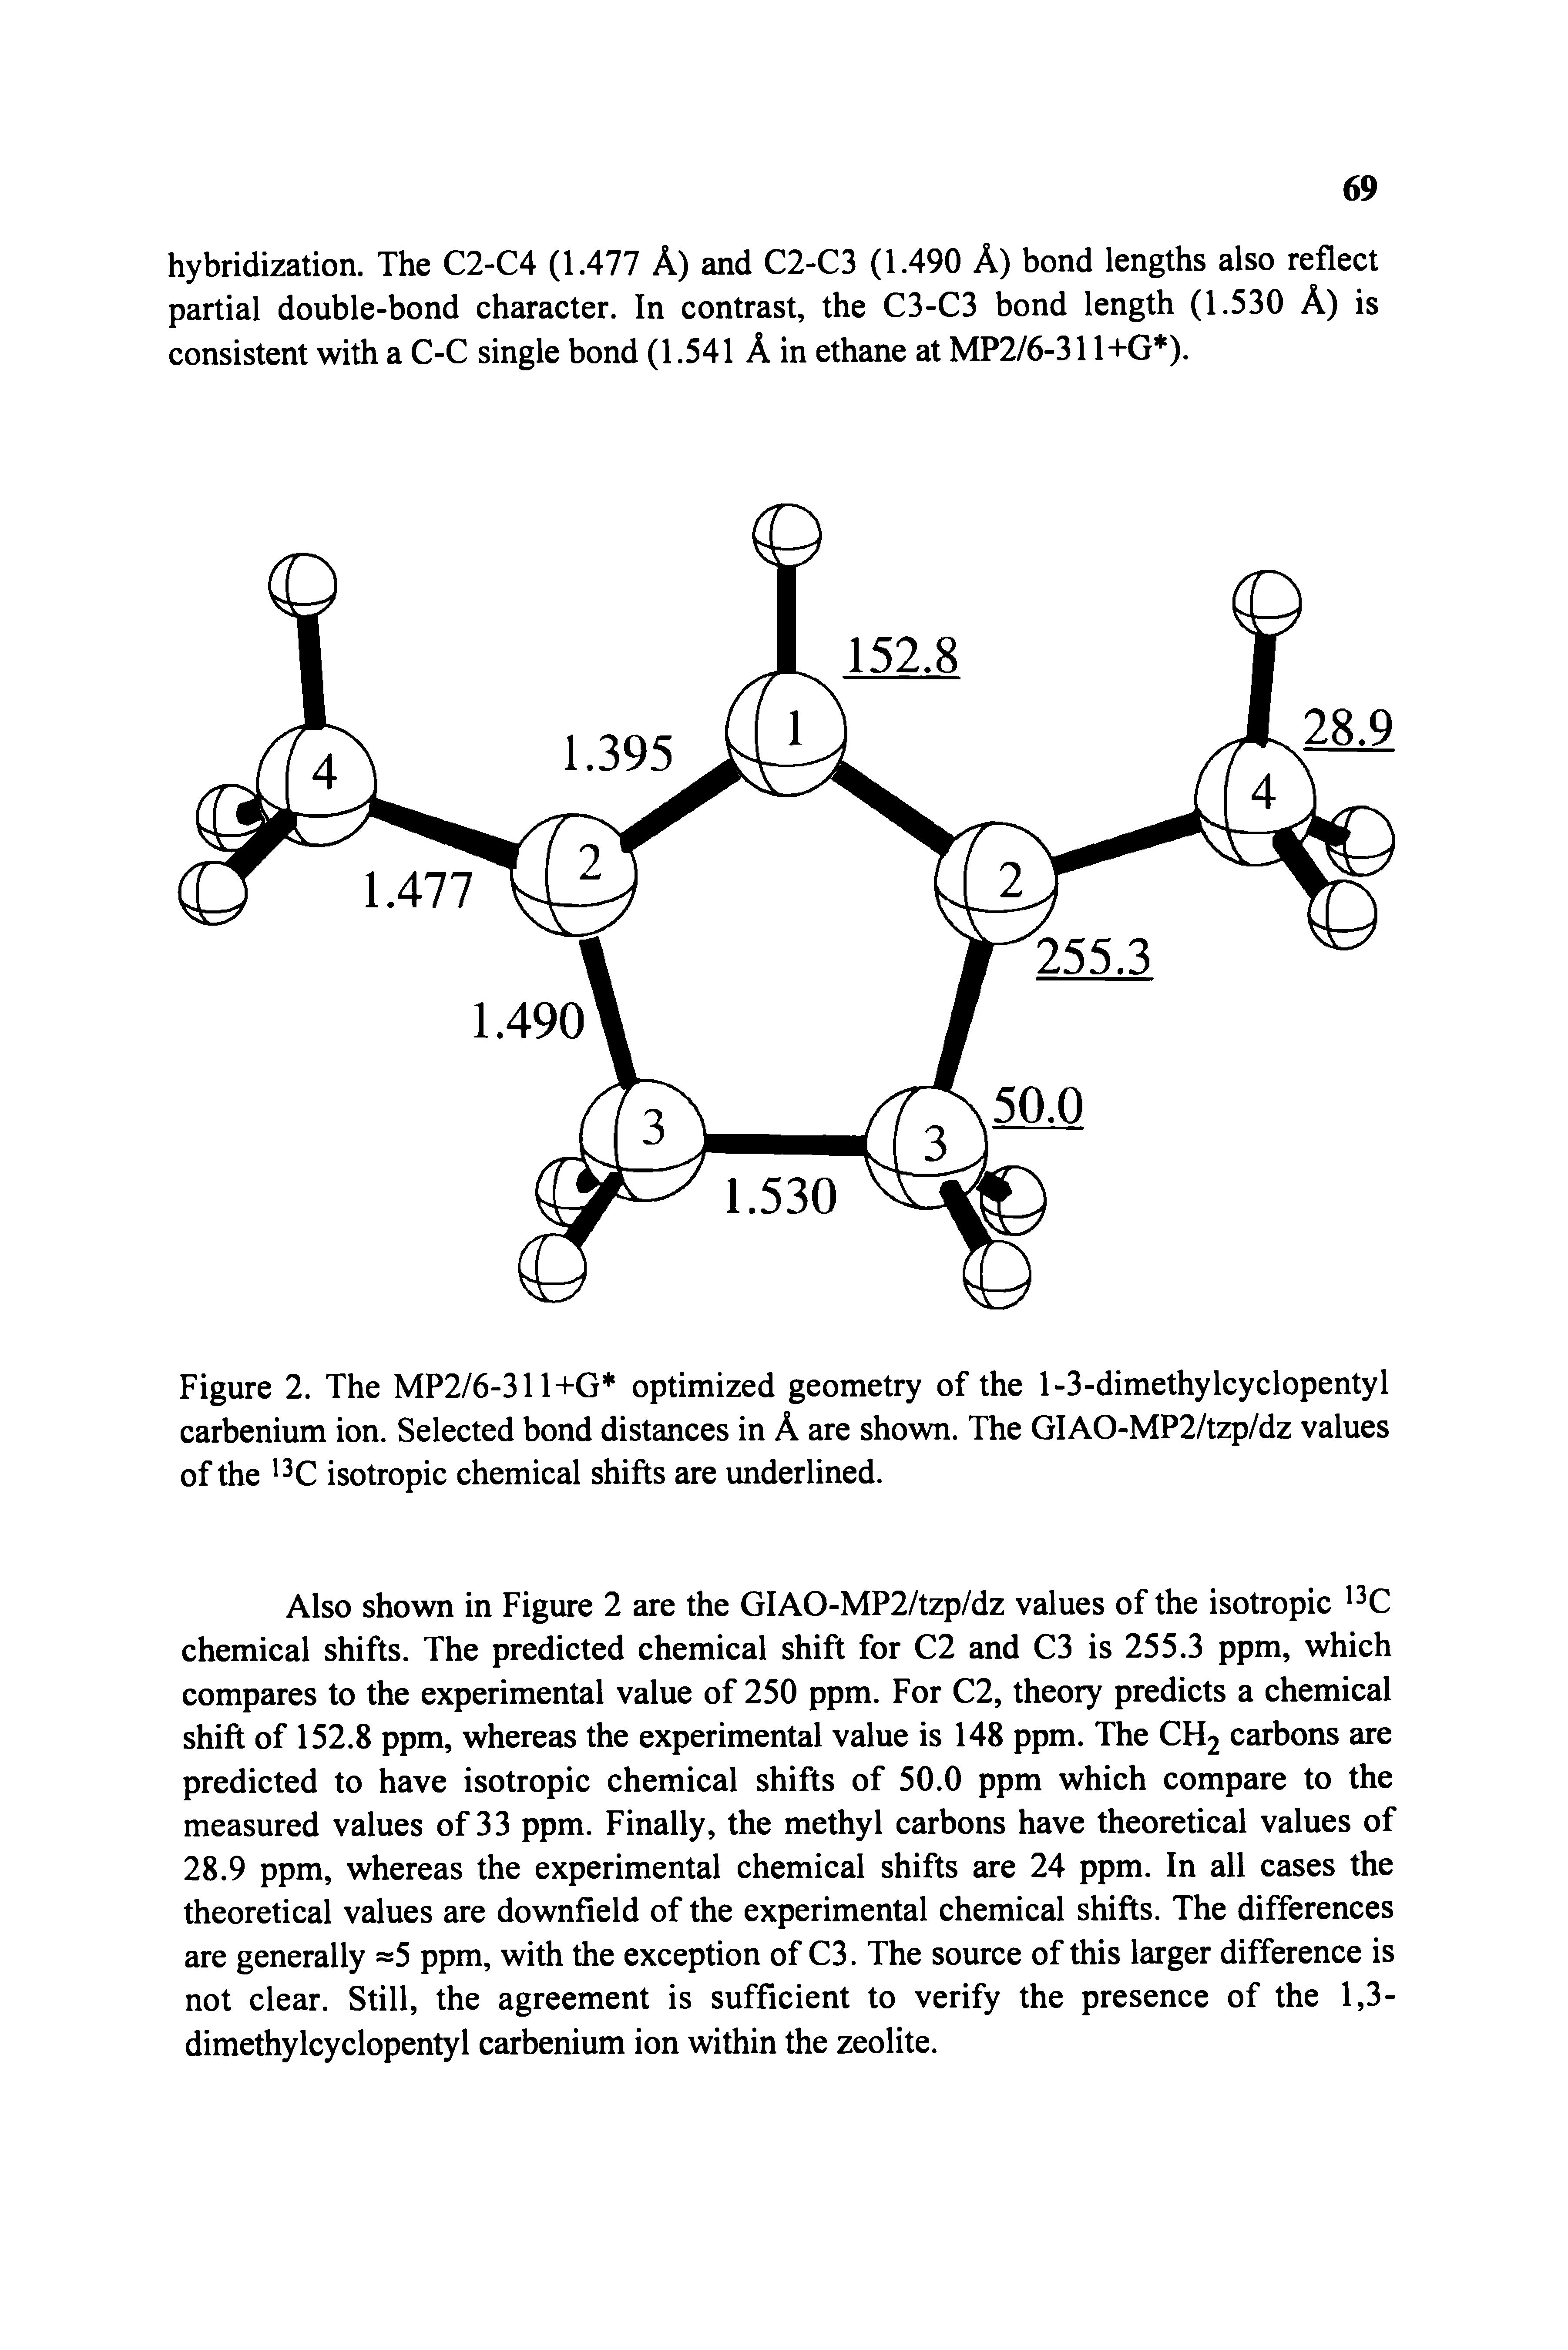 Figure 2. The MP2/6-311+G optimized geometry of the 1-3-dimethylcyclopentyl carbenium ion. Selected bond distances in A are shown. The GIAO-MP2/tzp/dz values of the 13C isotropic chemical shifts are underlined.